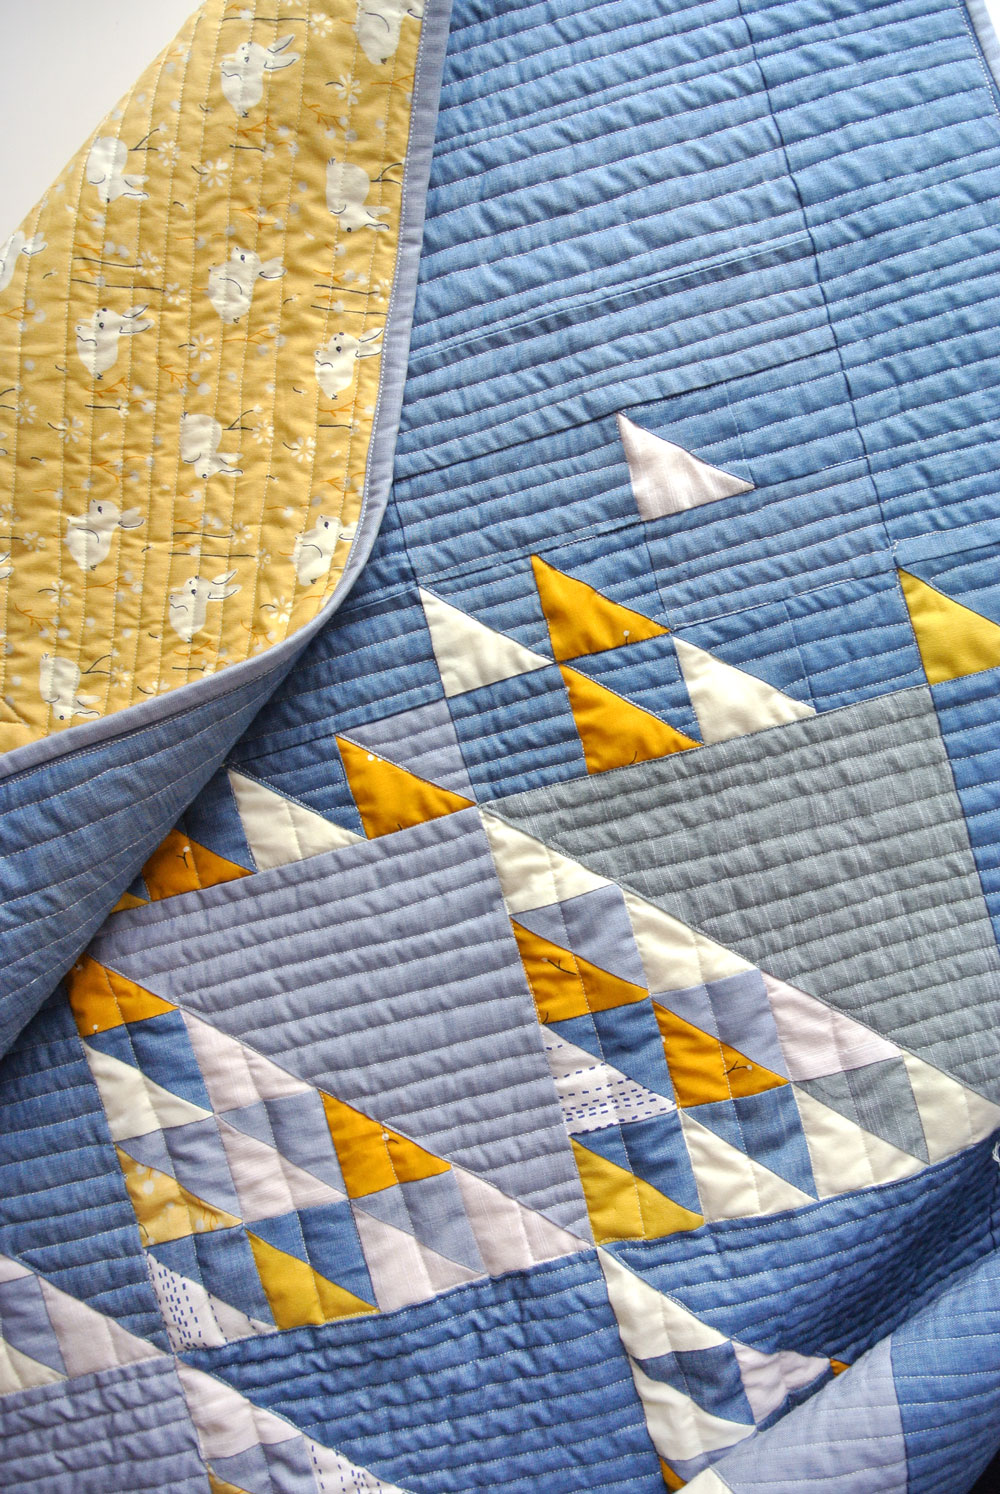 Fly Away Quilt Pattern: Use Up Those Scraps! Quilt Pattern Available From Suzy Quilts | Suzy Quilts https://suzyquilts.com/fly-away-quilt